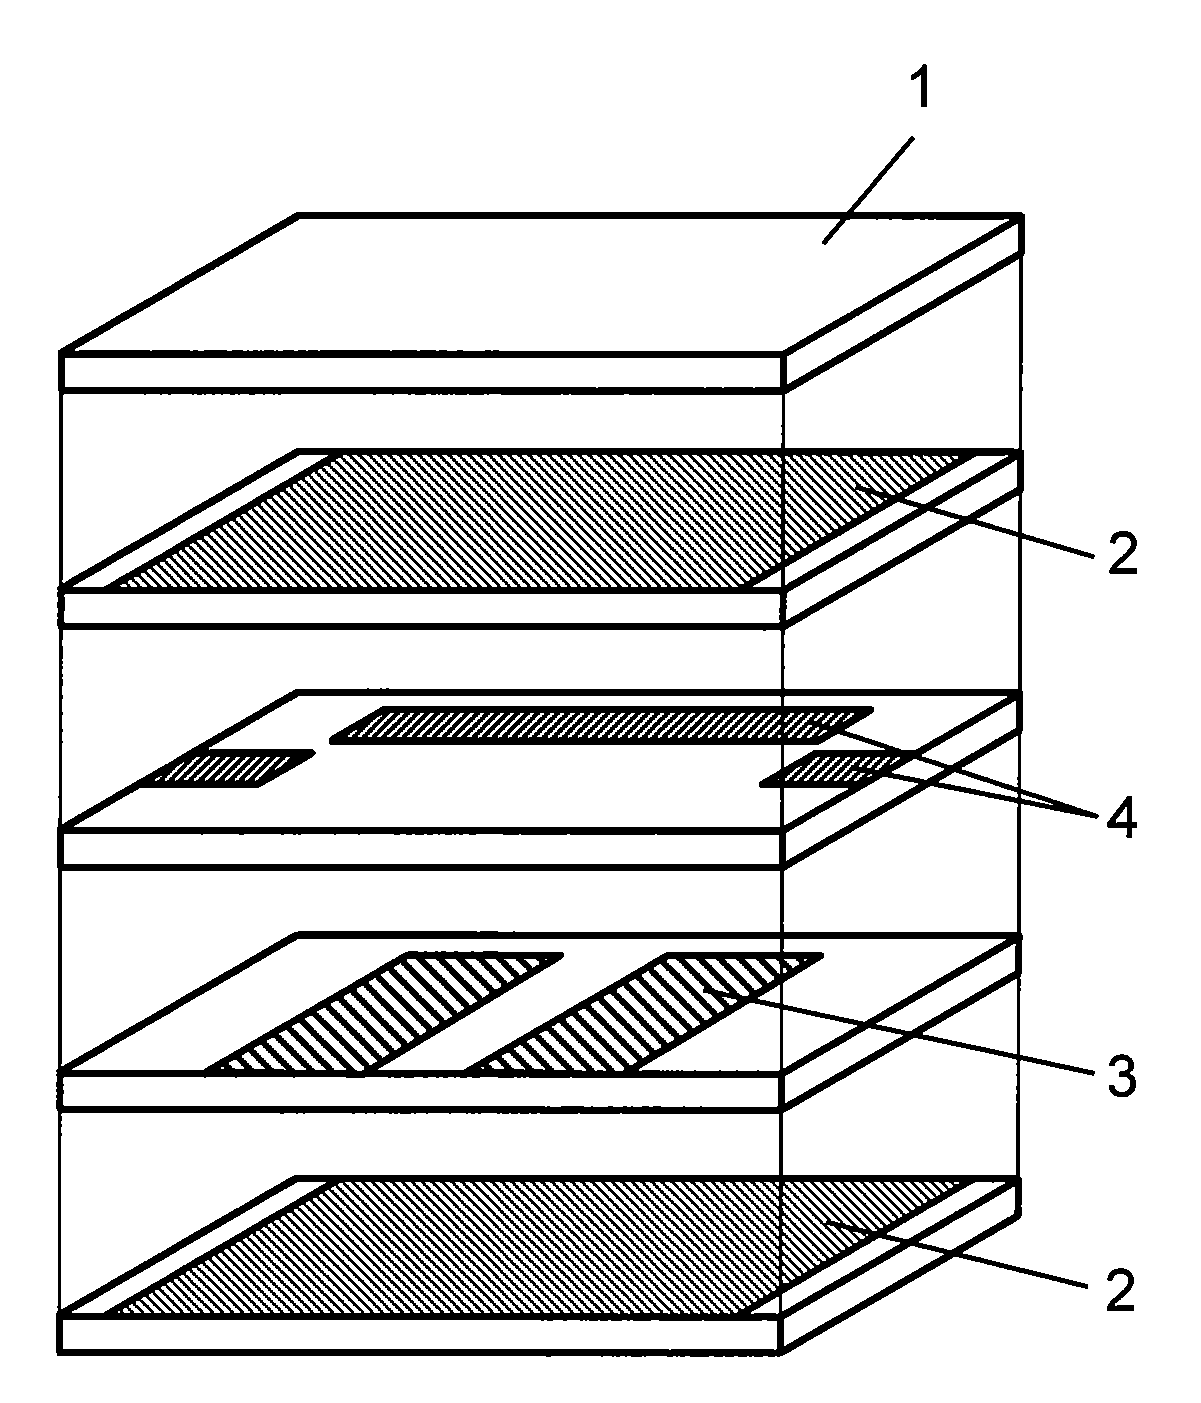 Ceramic laminated device and method for manufacturing same